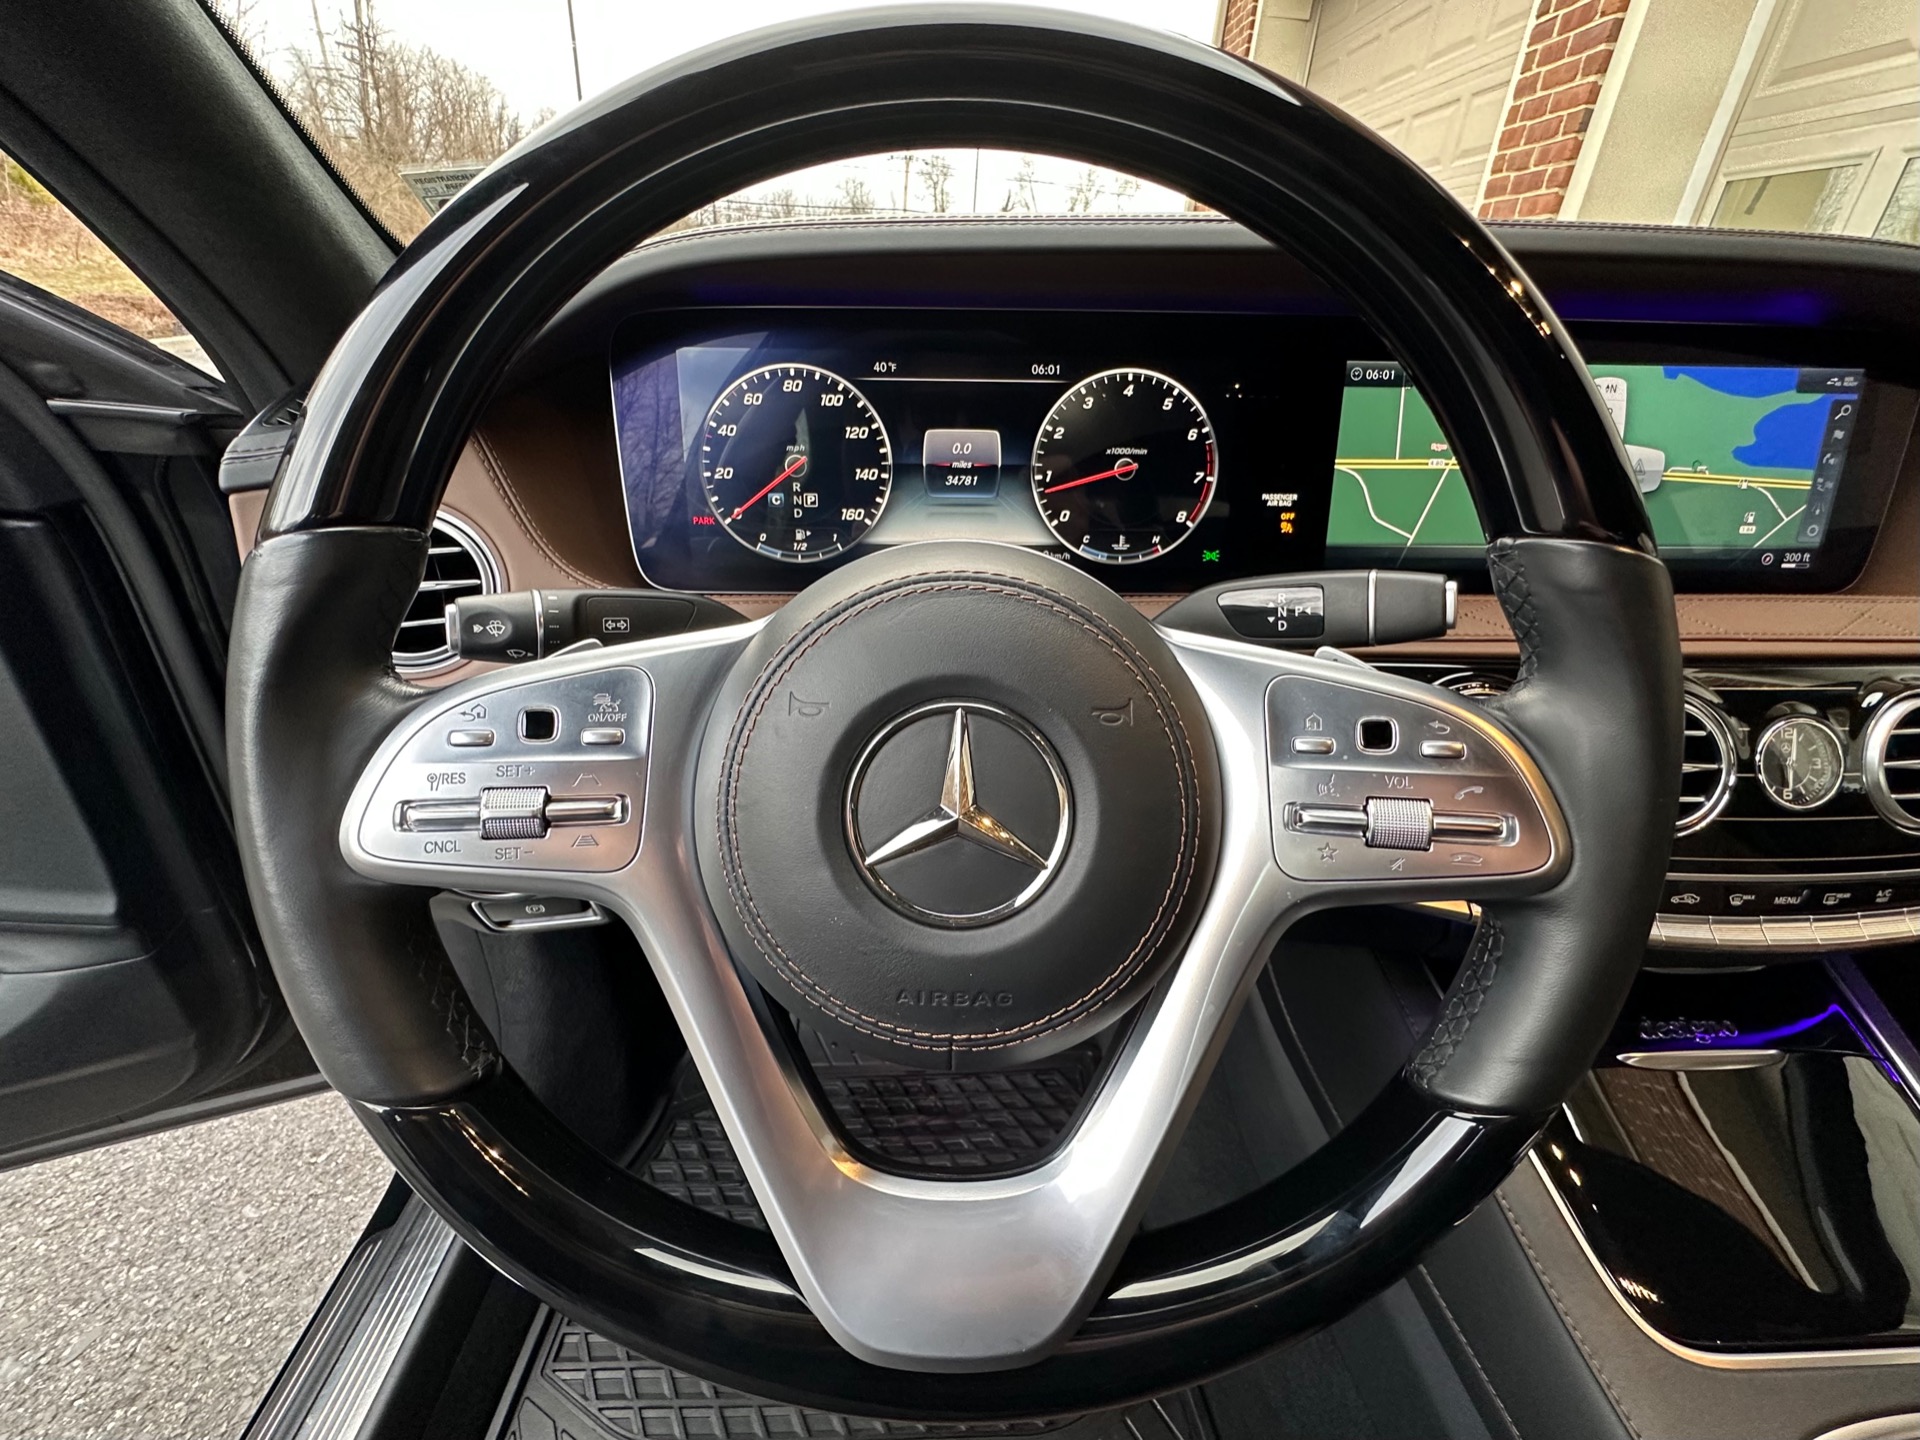 Used-2018-Mercedes-Benz-S-Class-S-560-4MATIC